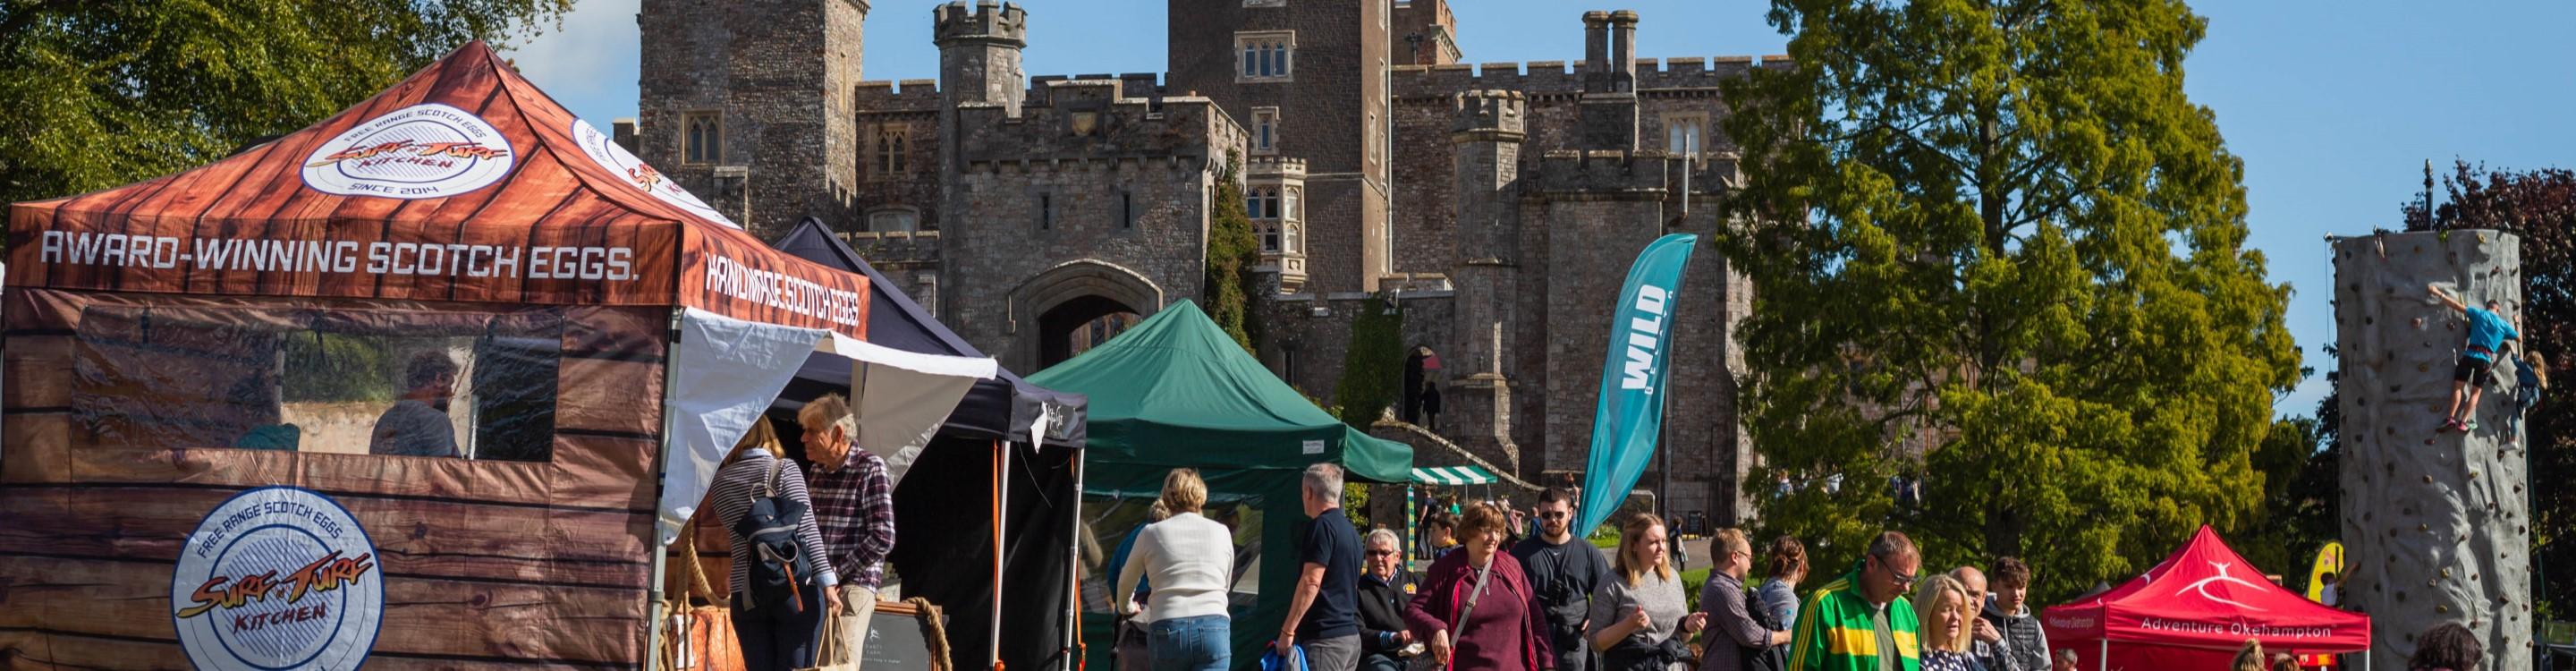 The Powderham Food Festival in full flow, with crowds of people in front of various food stalls and tents, with Powderham Castle in the background